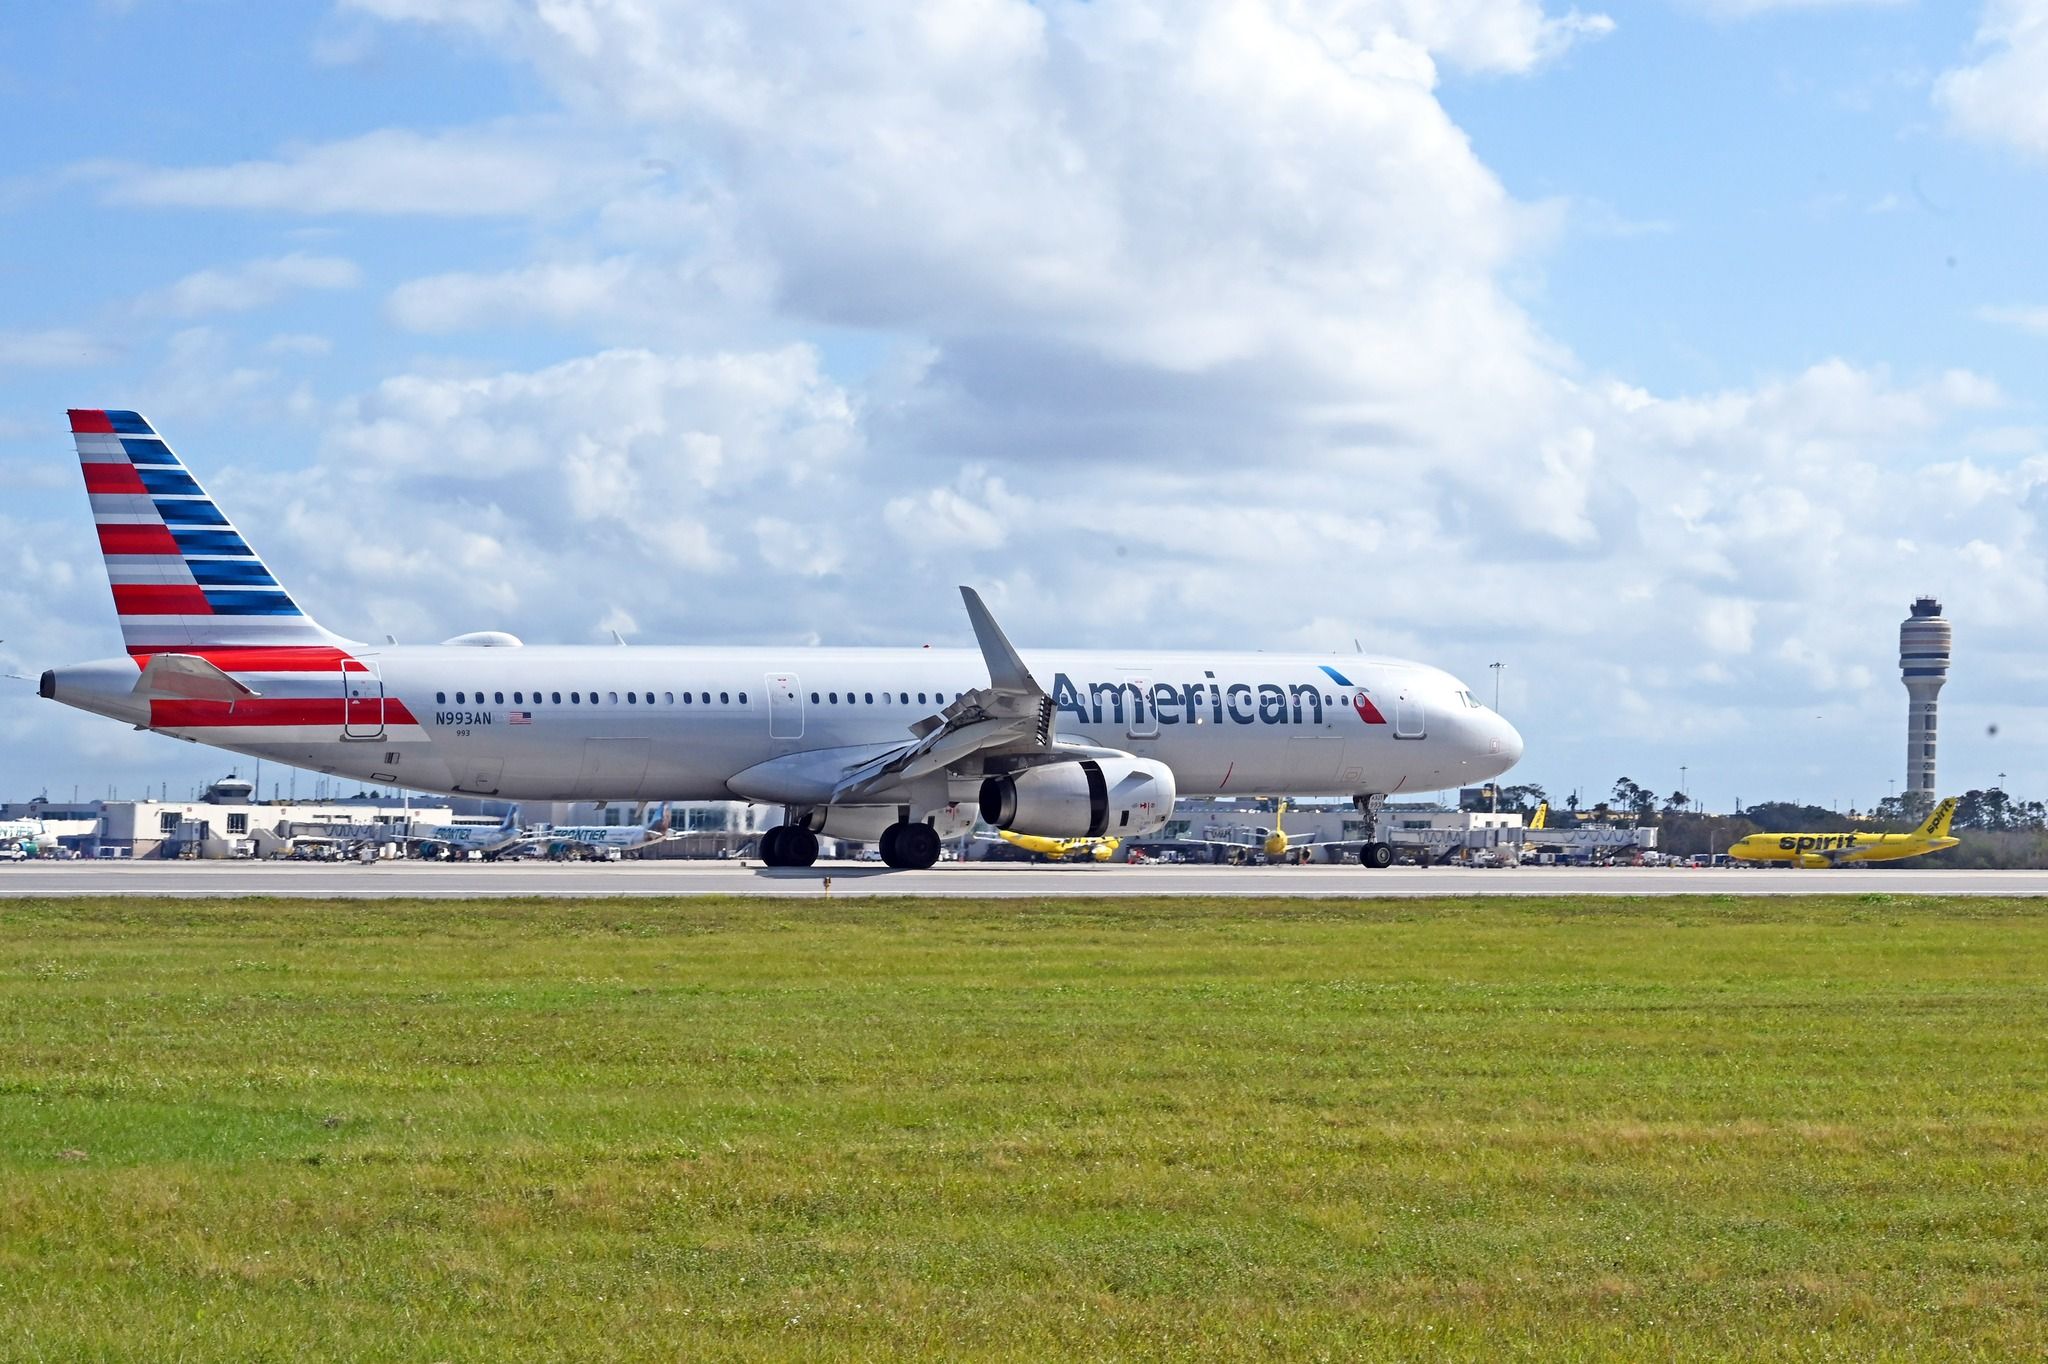 American Airlines Airbus A321 landing at Orlando International Airport.